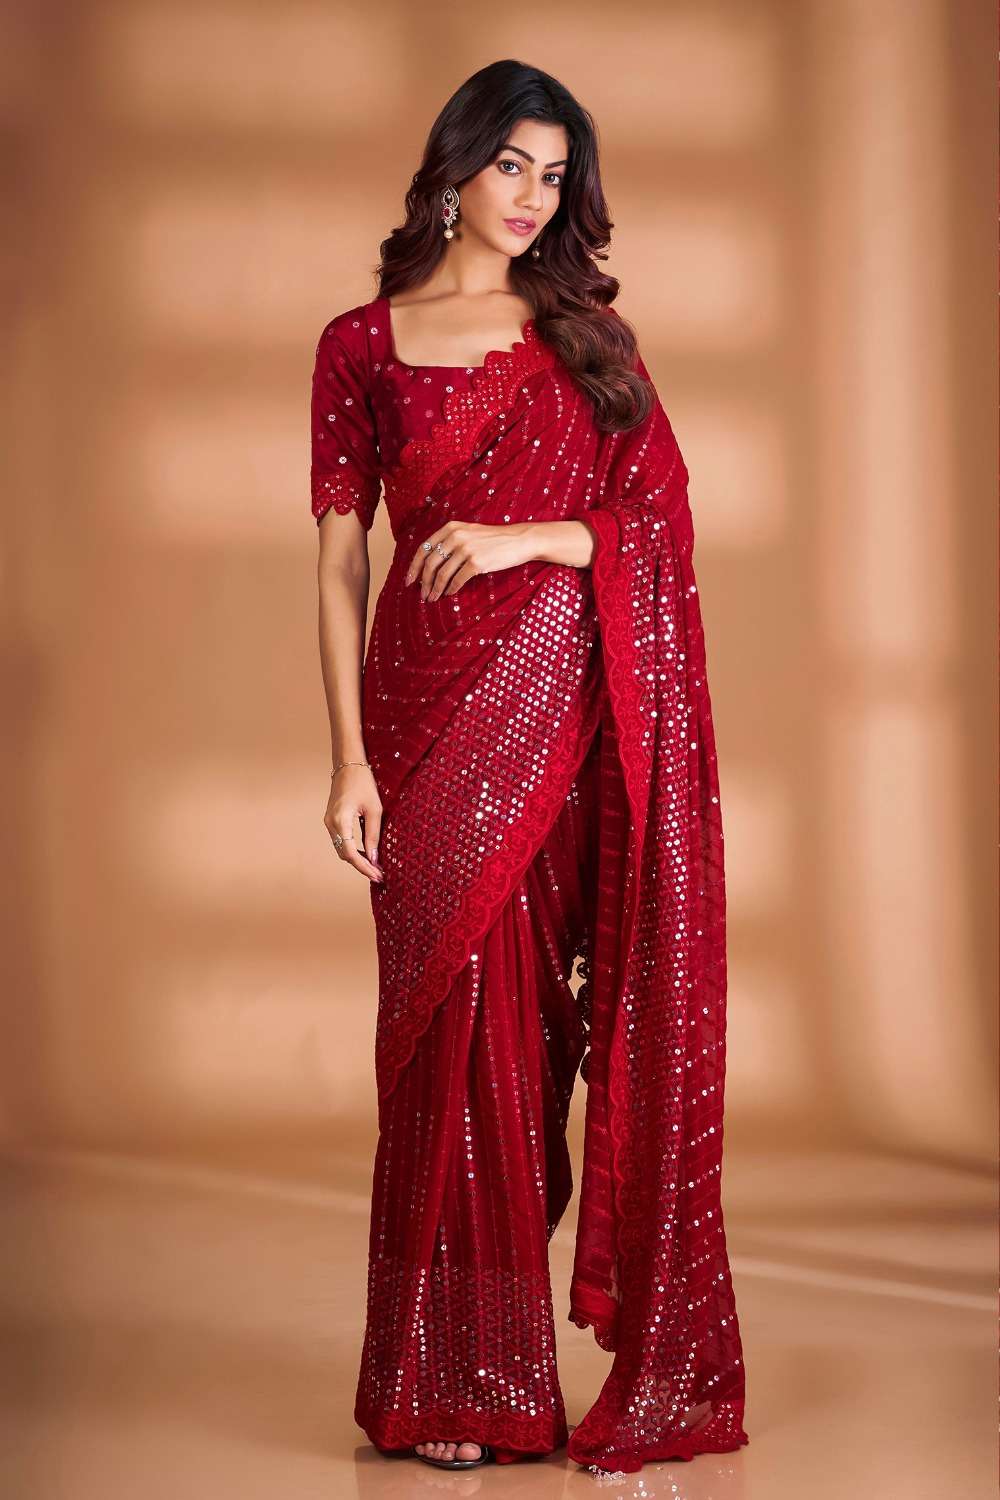 saree designer partywear saree in red colour new designer party wear peding with 7 mm sequence work on saree design number bt 361 partywear saree 